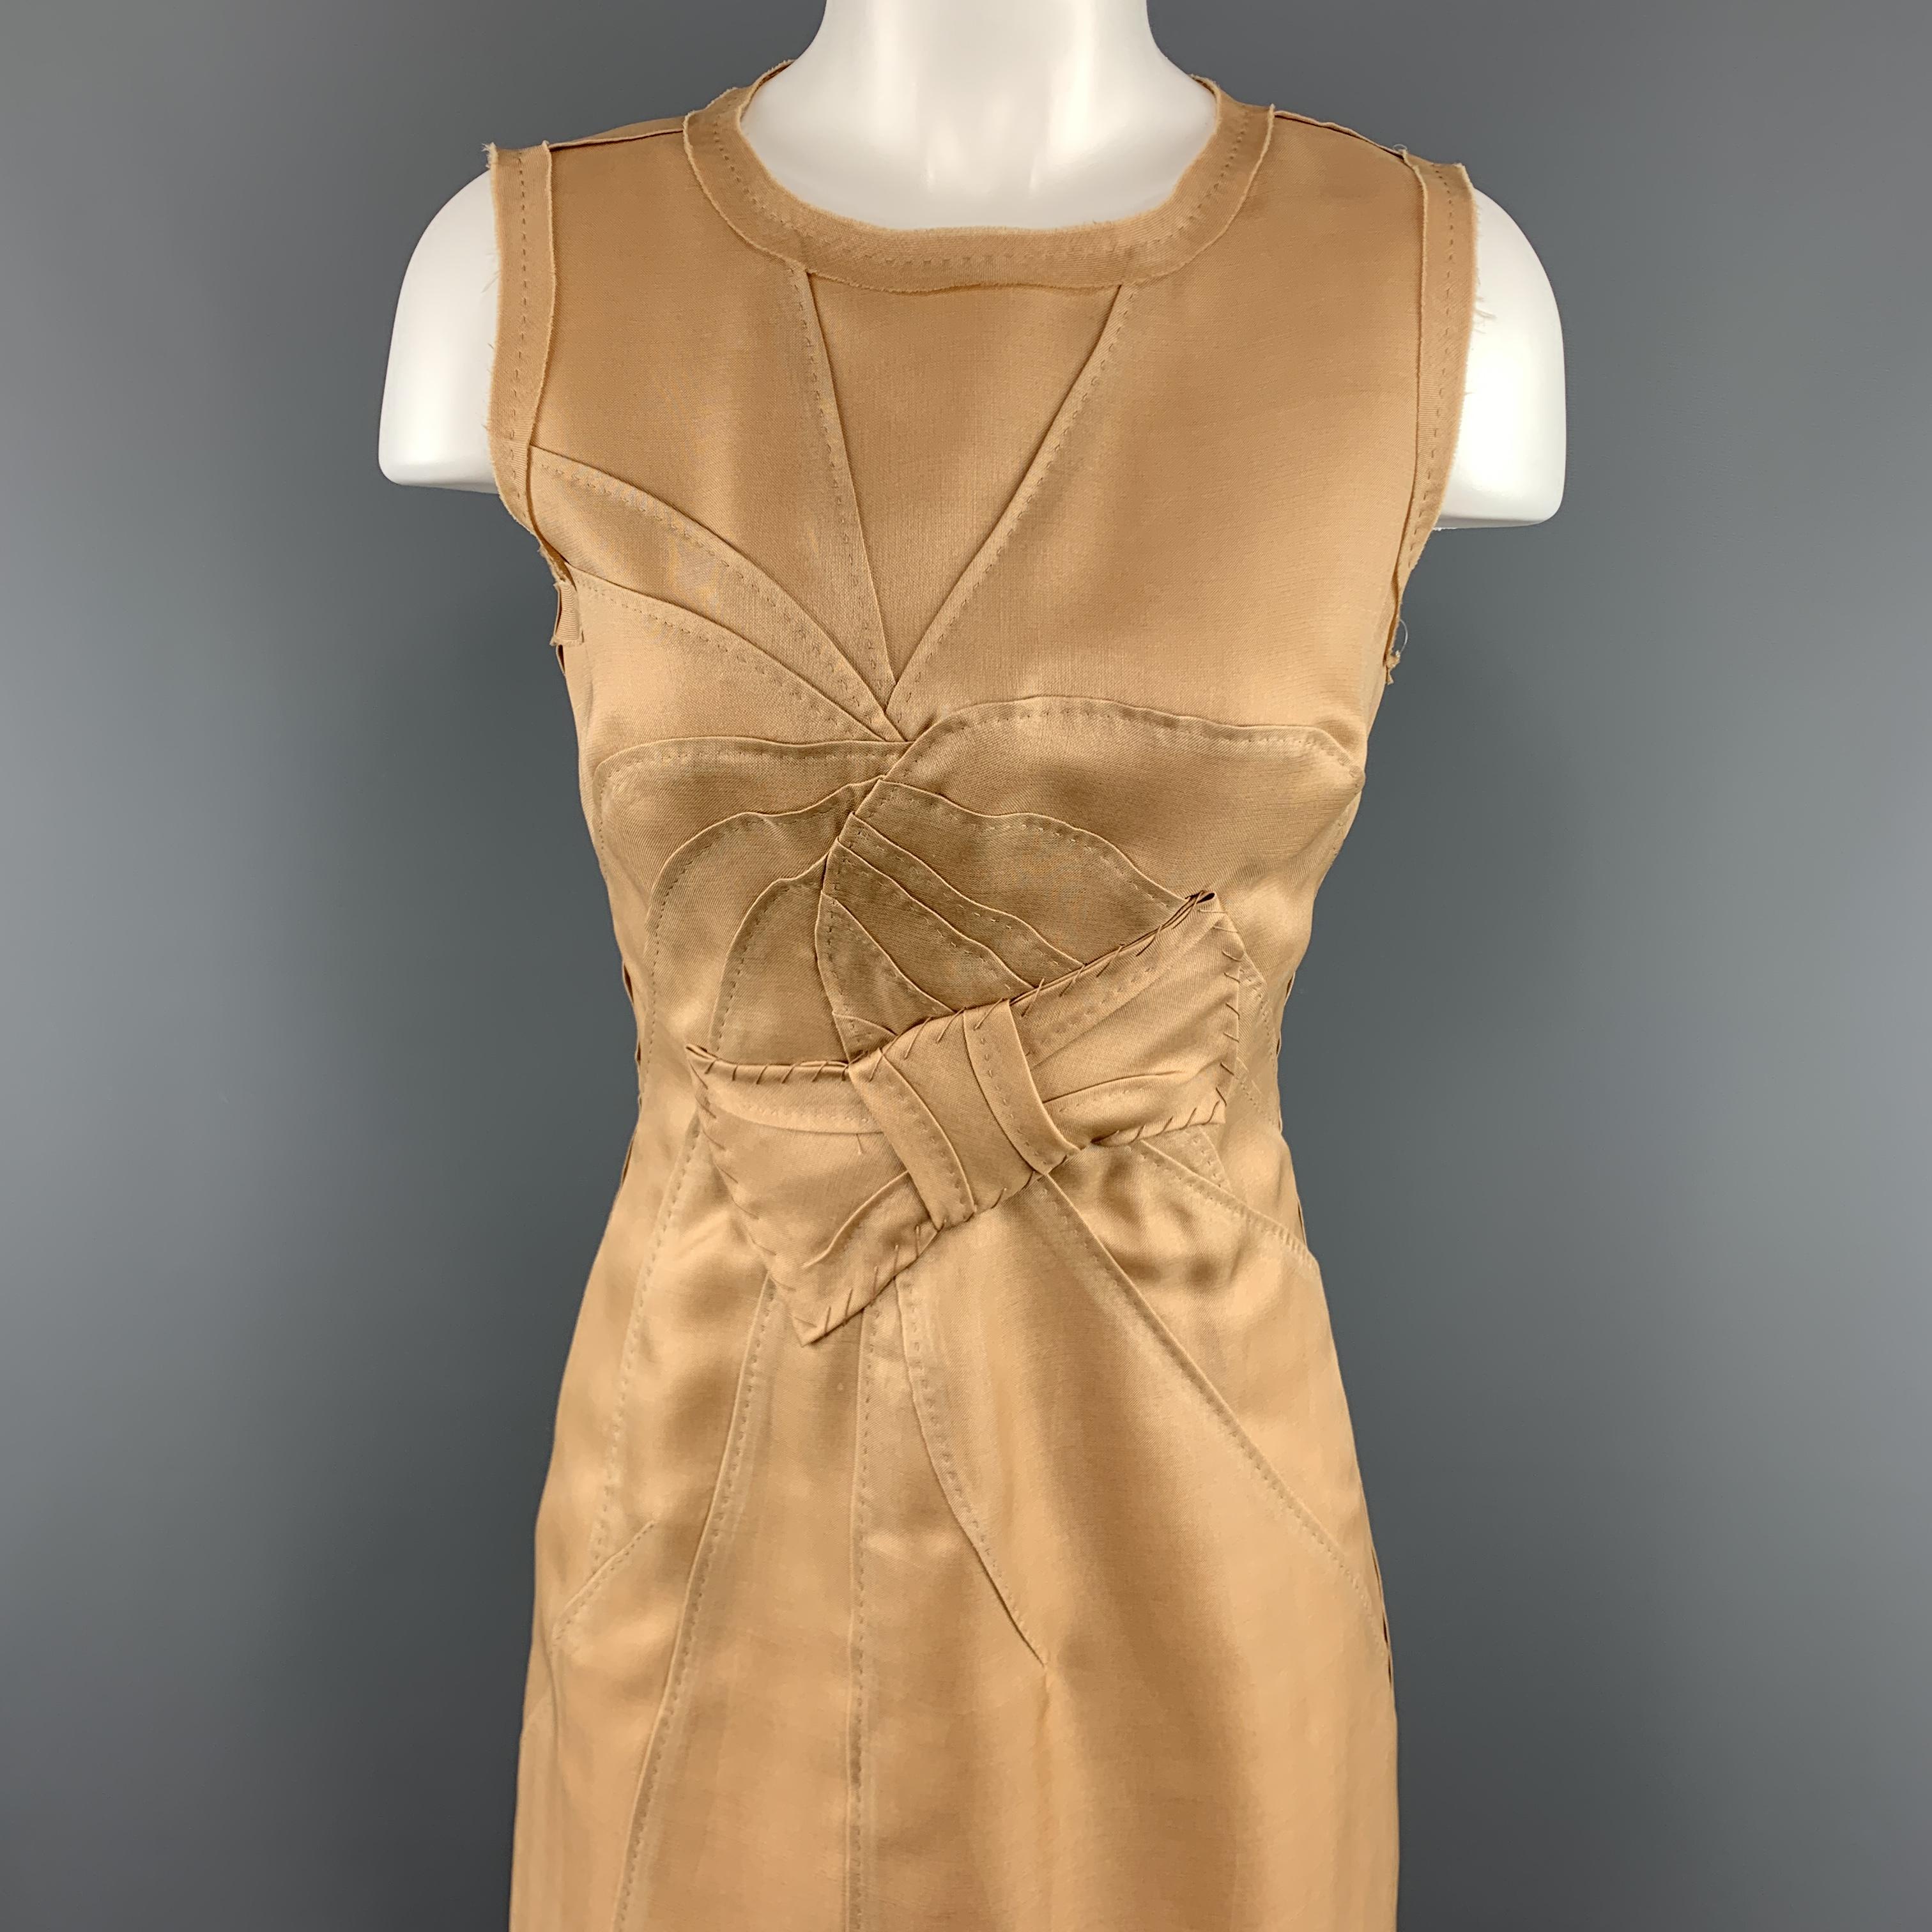 PRADA sleeveless sheath cocktail dress comes in beige woven silk with a raw edged round neckline and top stitched panelled top stitch motif with bow applique. Made in Italy.

Excellent Pre-Owned Condition.
Marked: IT 40

Measurements:

Shoulder: 14